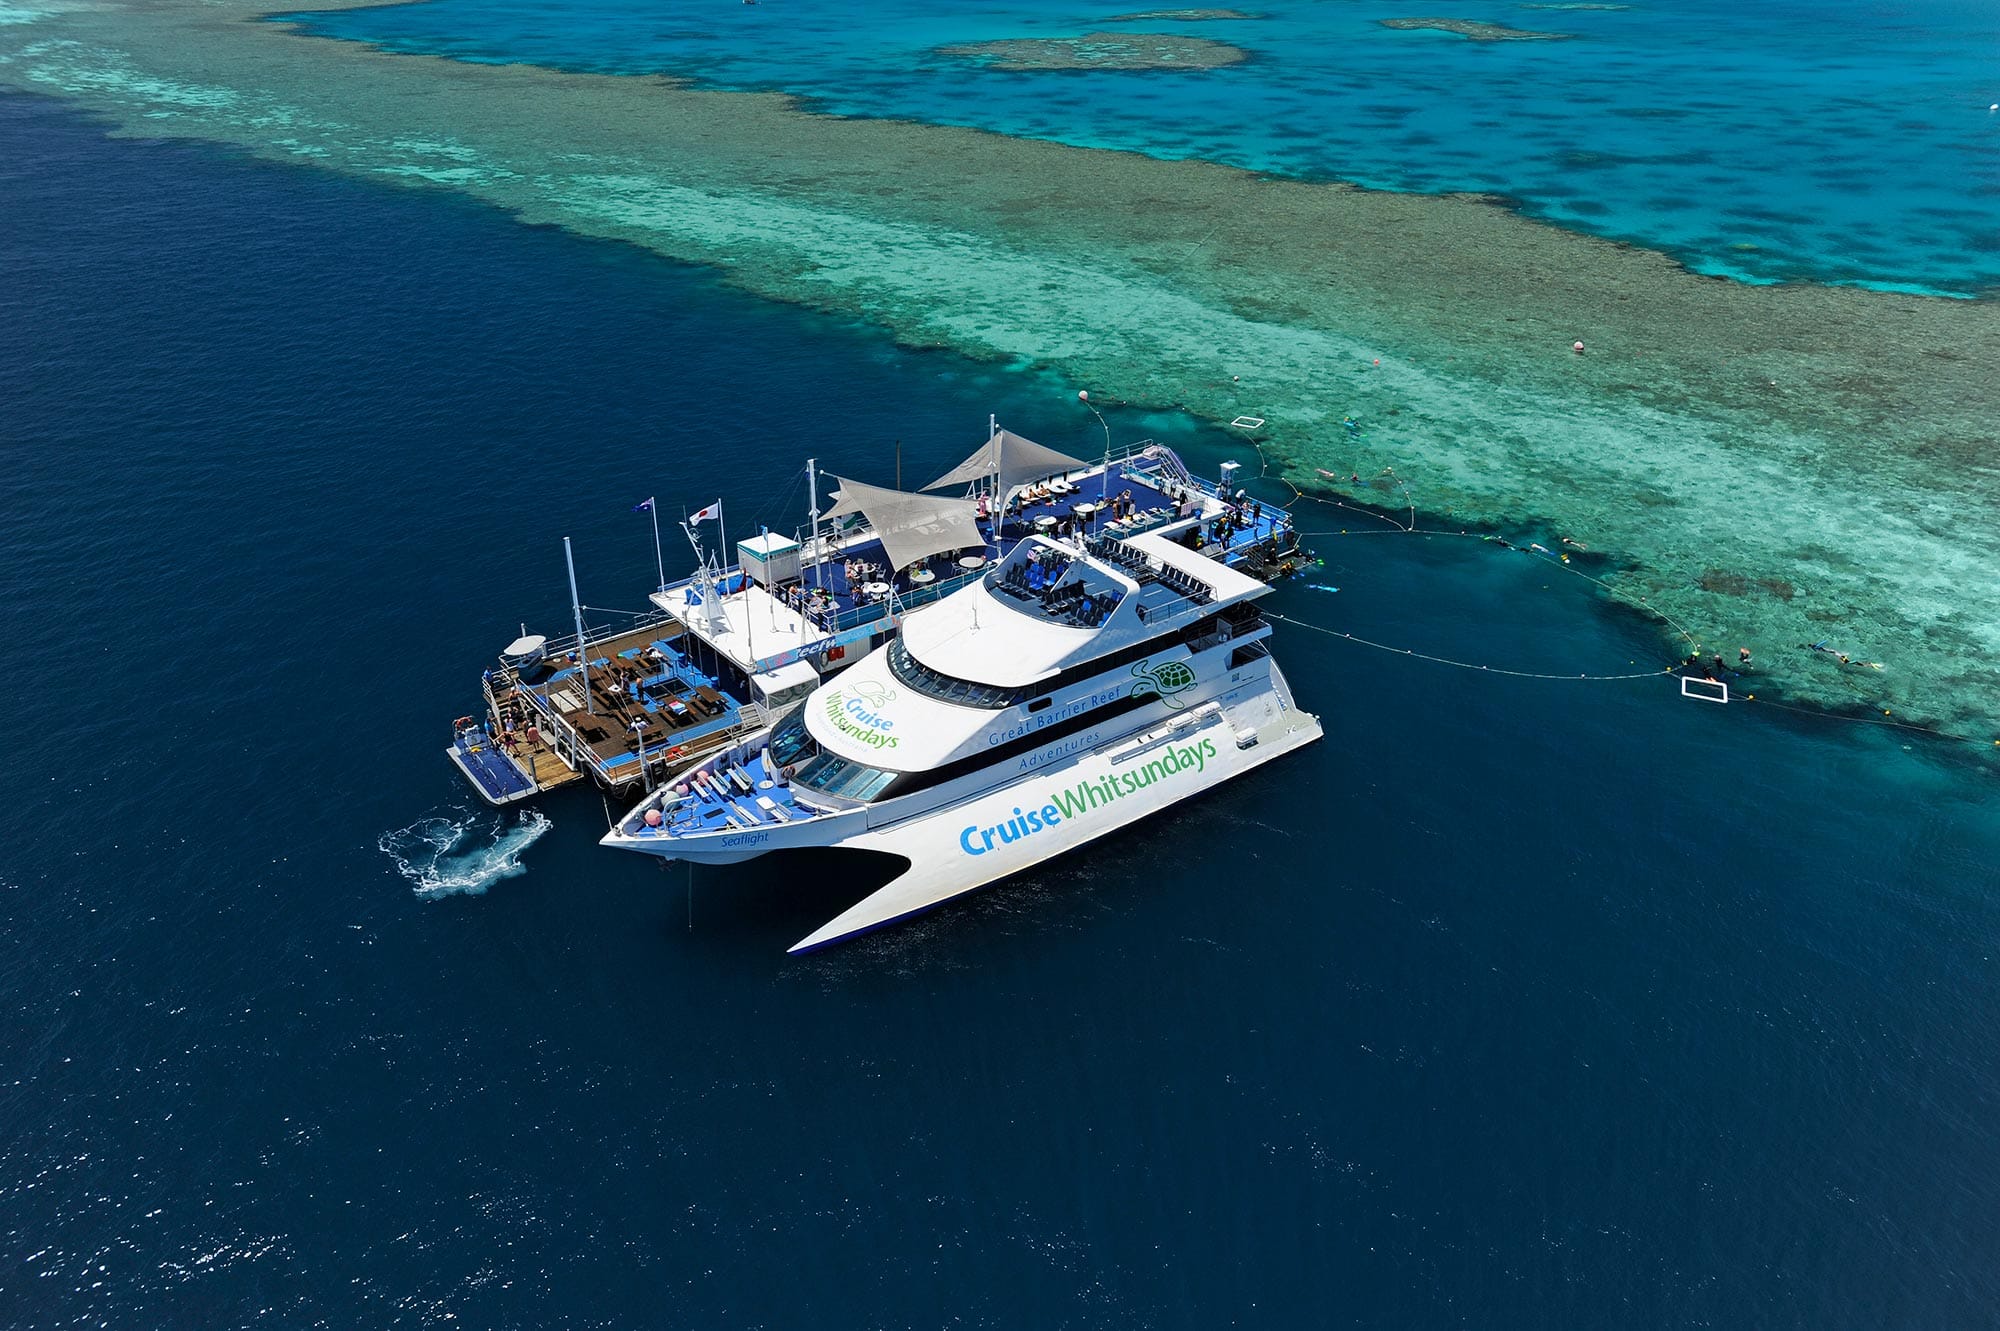 whitsunday cruises from cairns